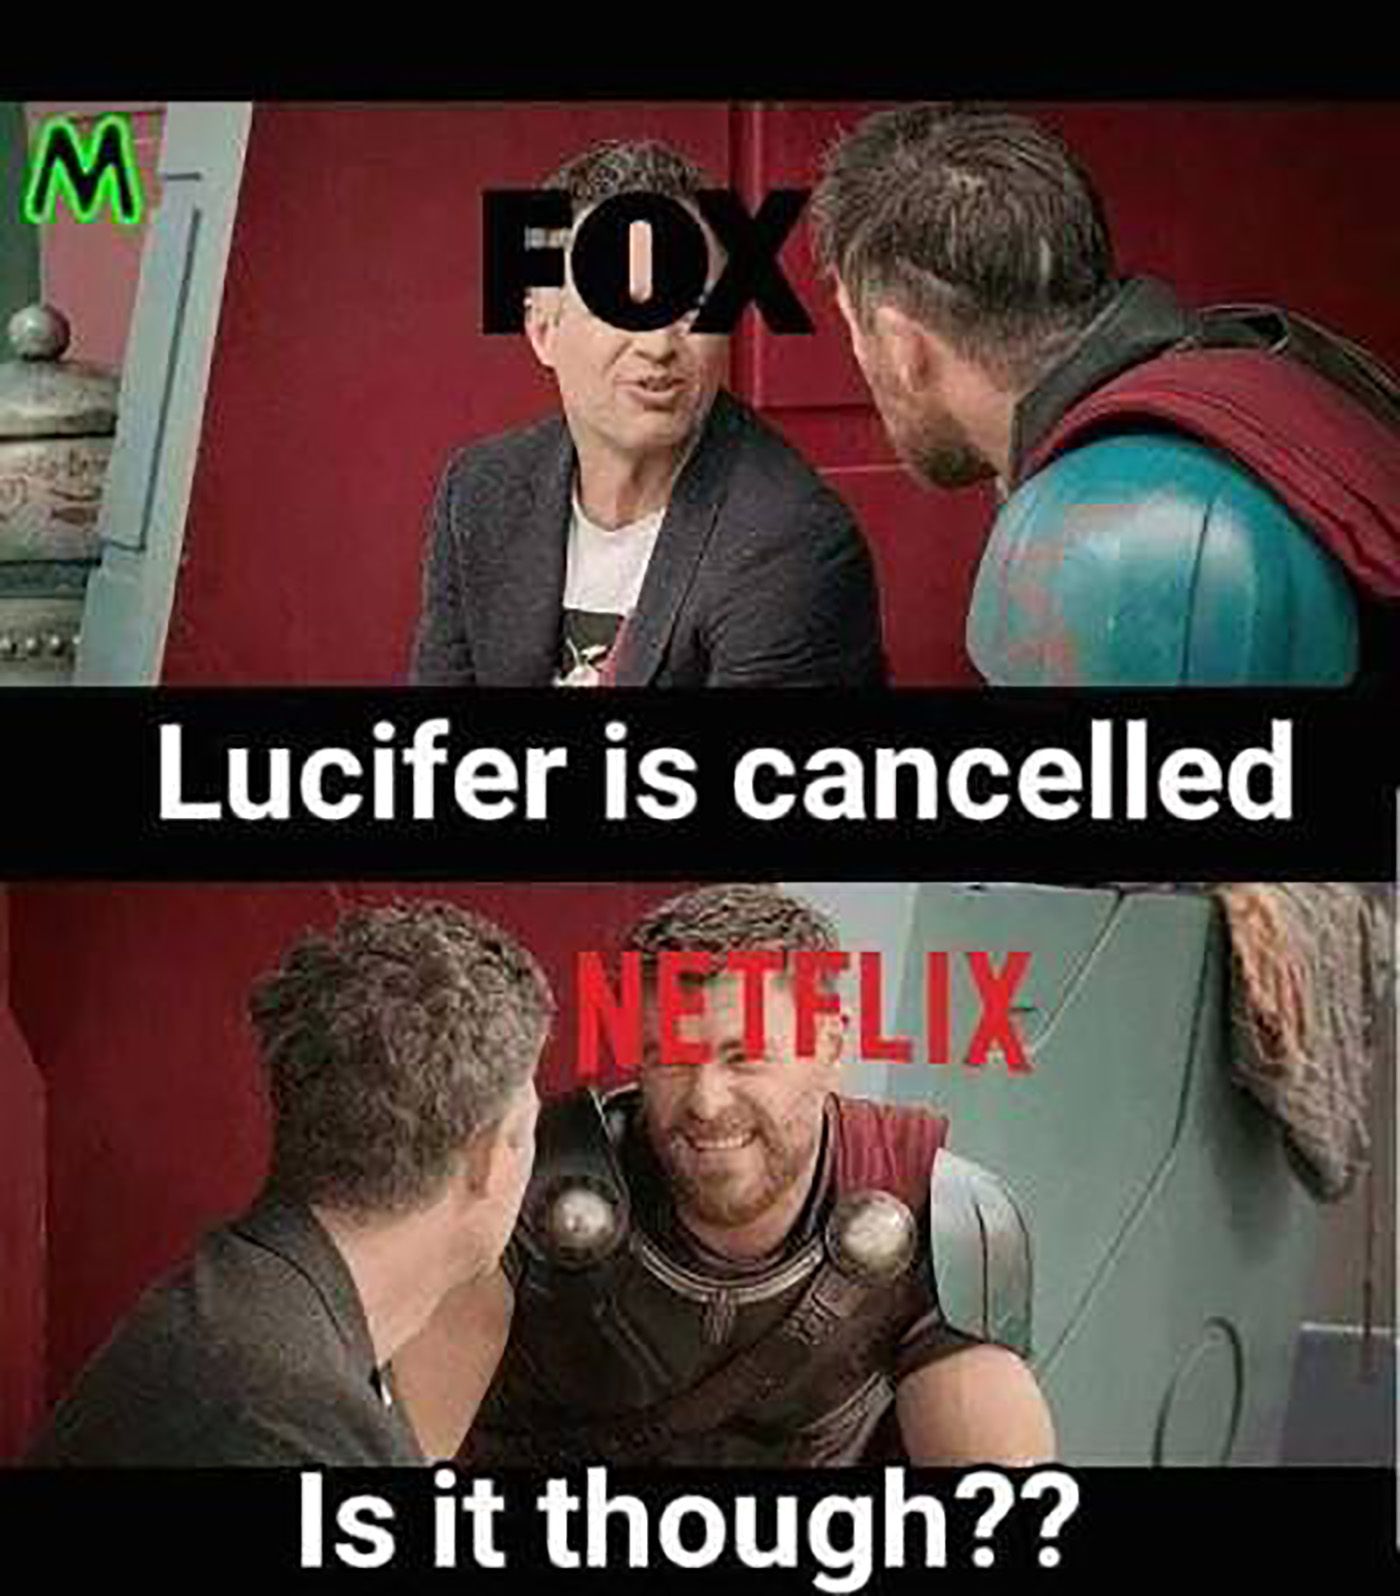 A funny meme about Lucifer being cancelled, showing Fox at the top and Netflix at the bottom.